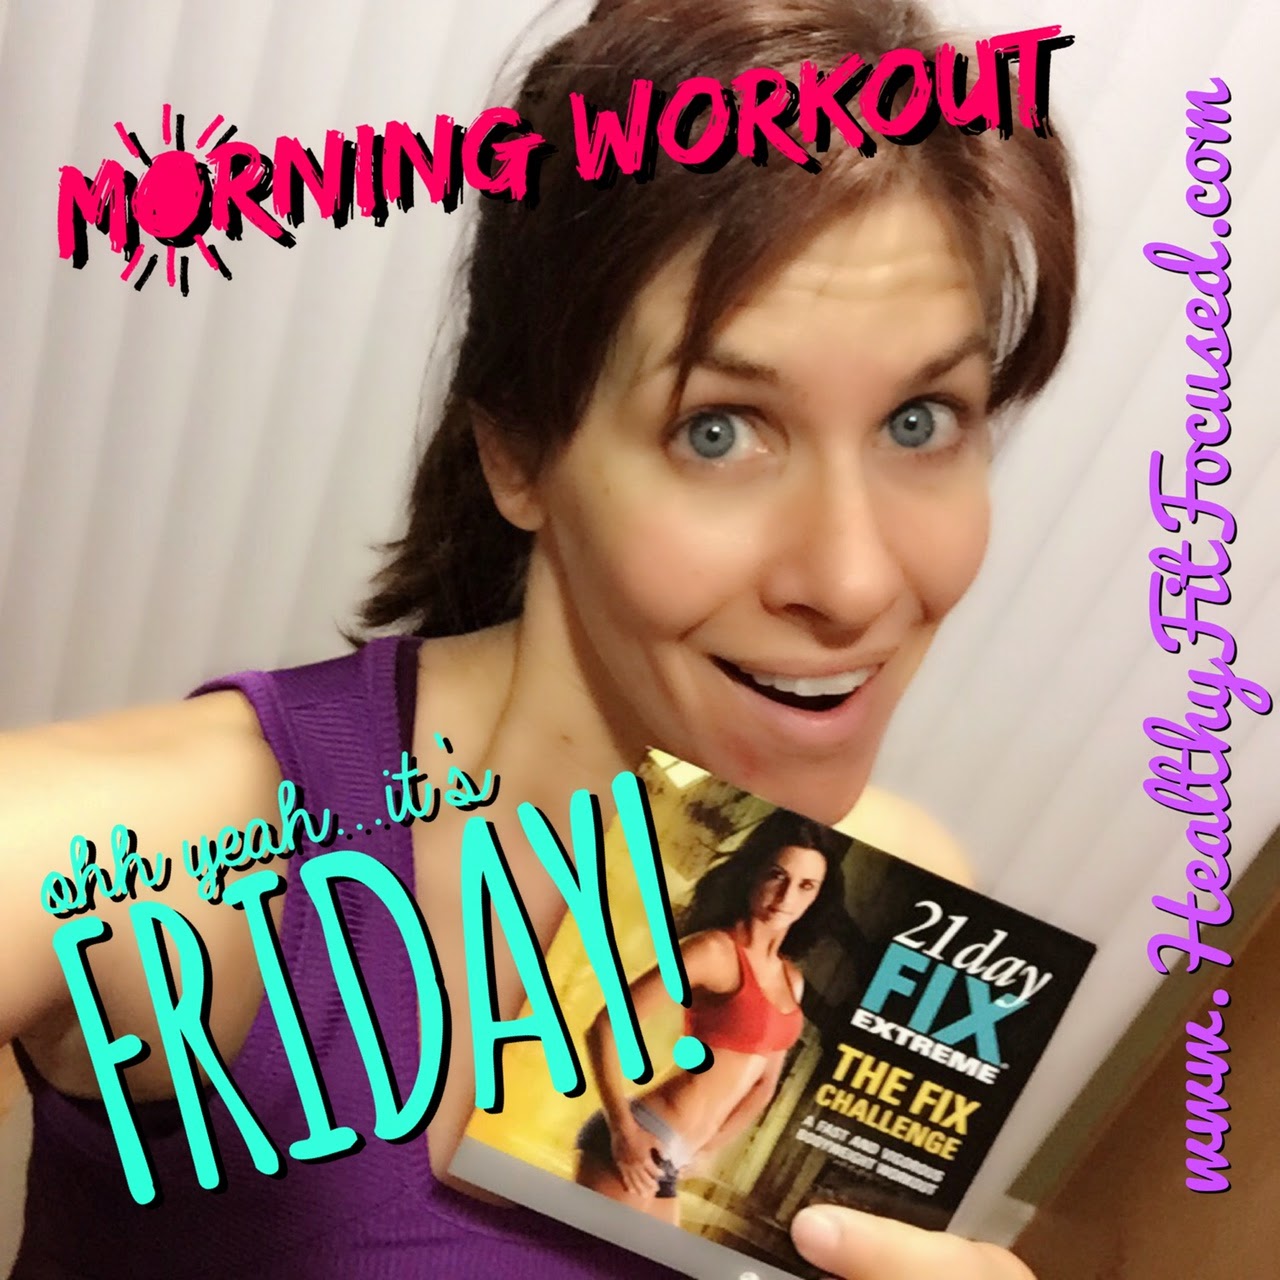 21 Day Fix Extreme Week 2 Update and Week 3 Meal Plan! 21 Day Fix Extreme Meal Plan, www.HealthyFitFocused.com, Julie Little